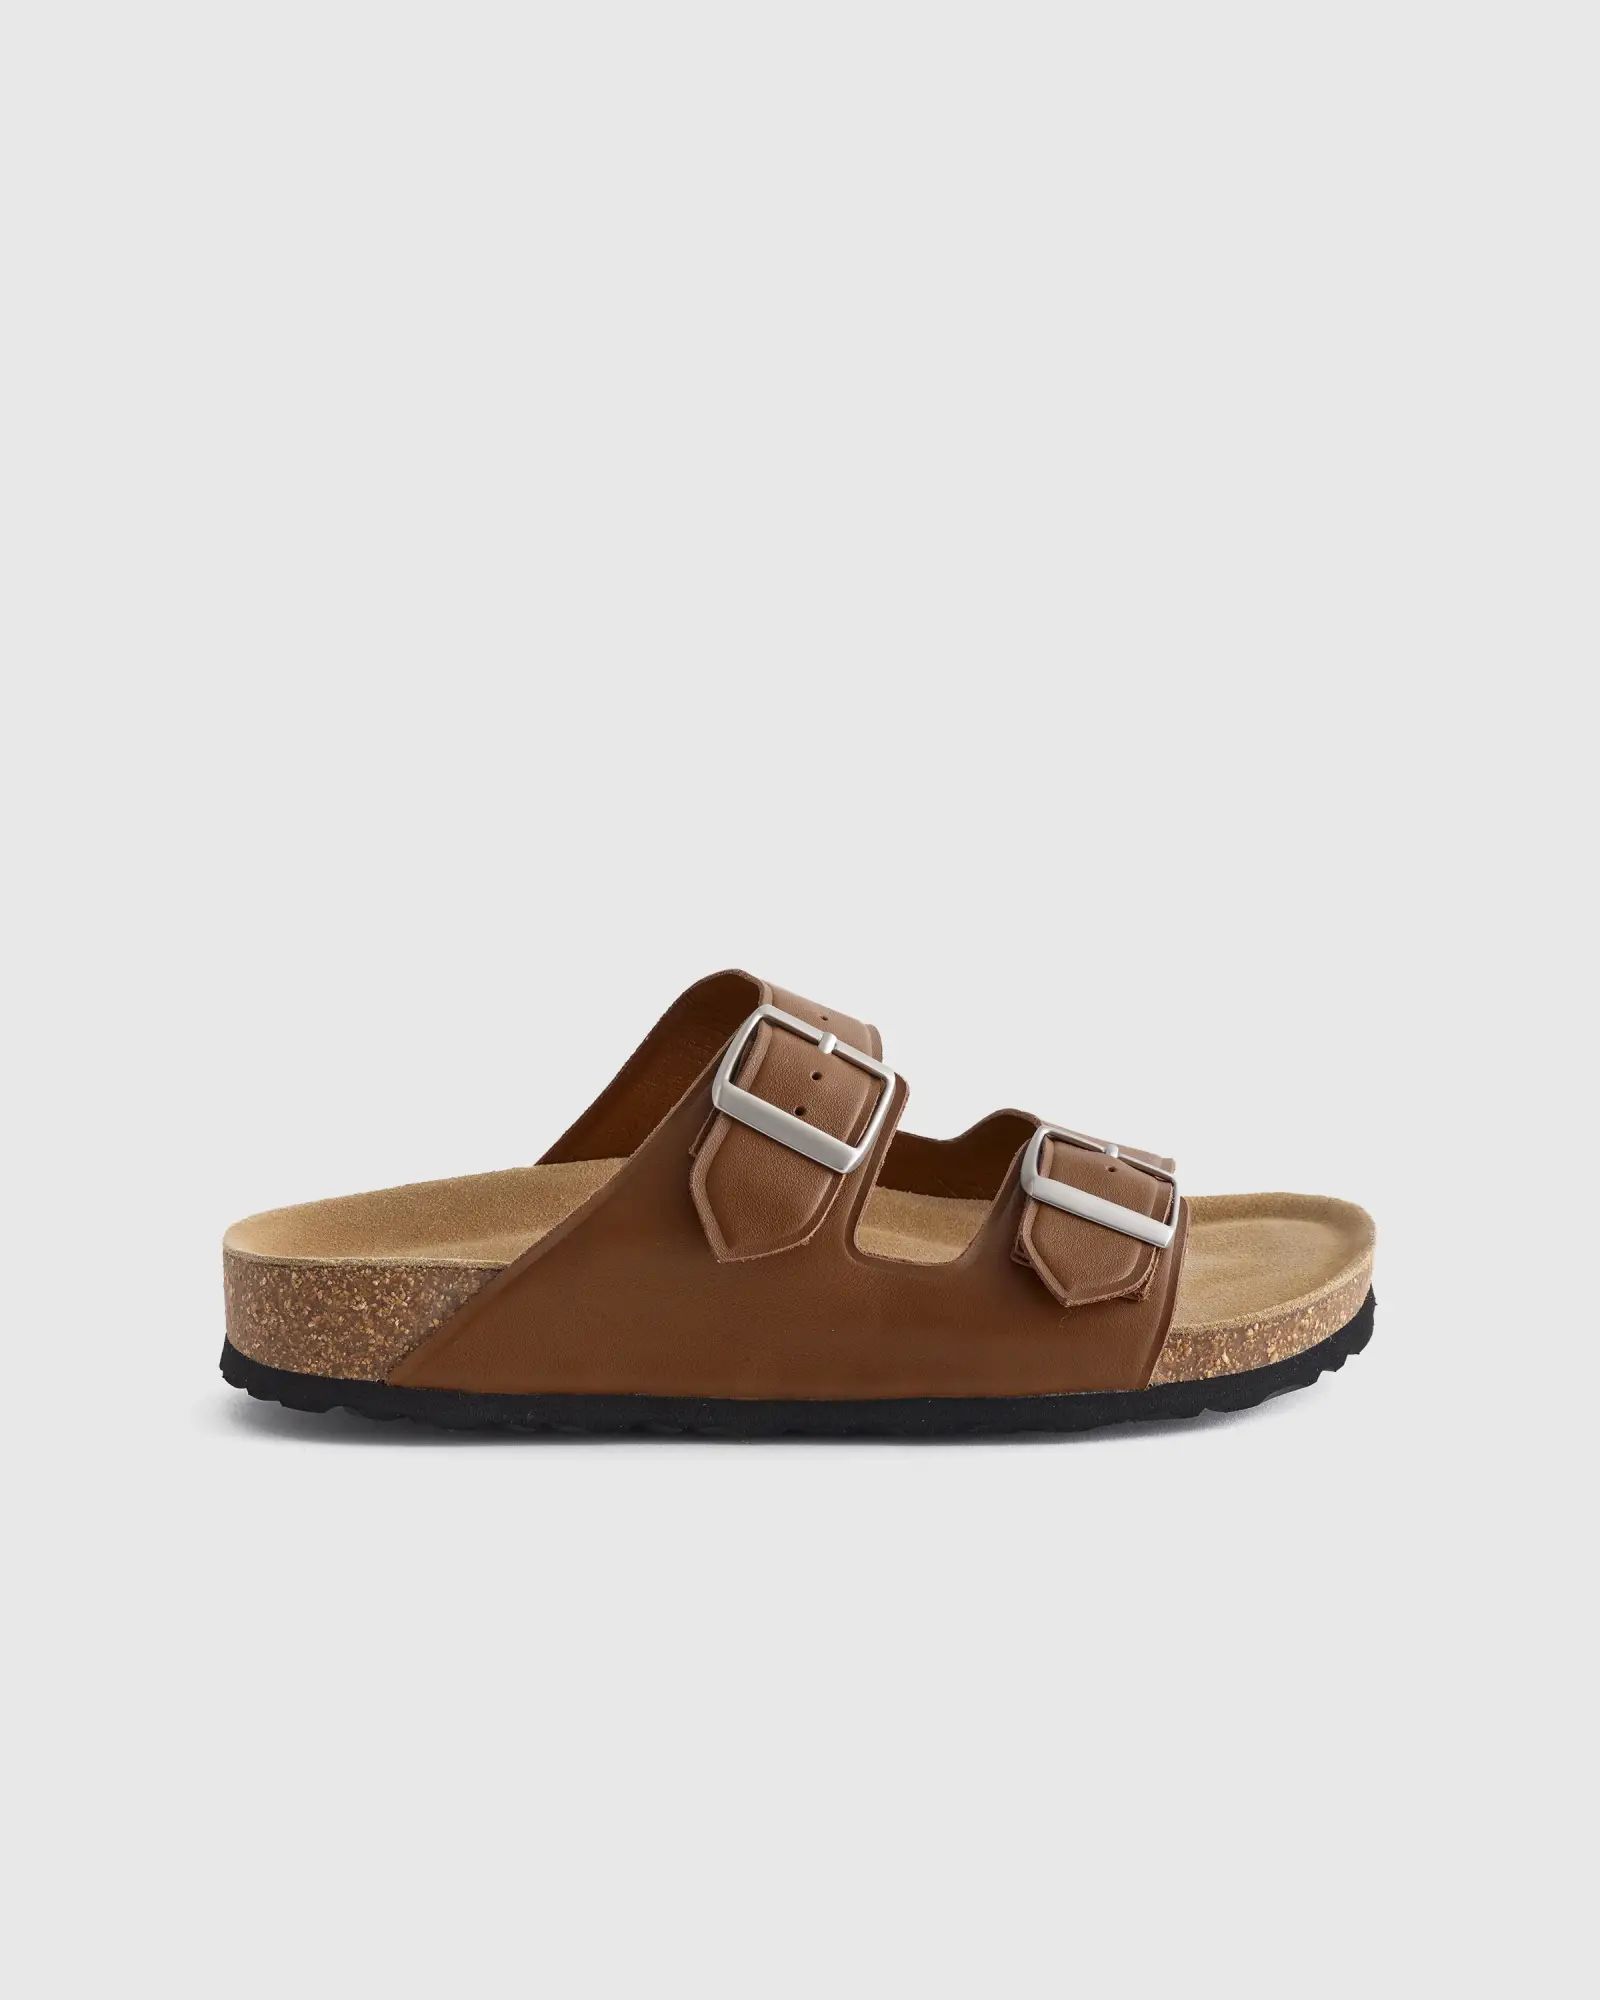 Nappa Leather Double Buckle Slide | Quince